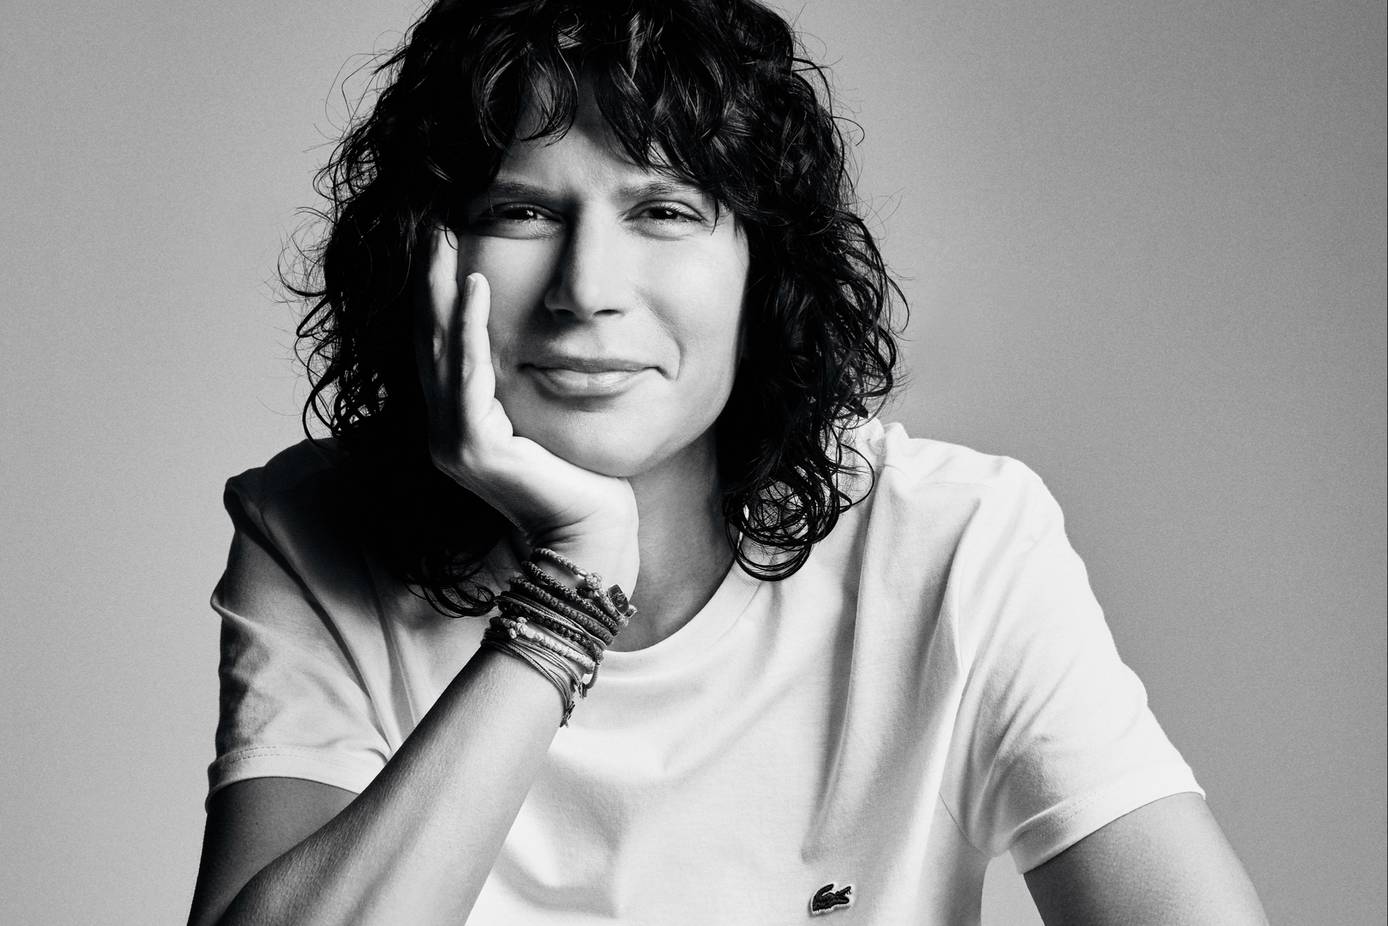 Lacoste Makes History by Appointing Louise Trotter as Its First